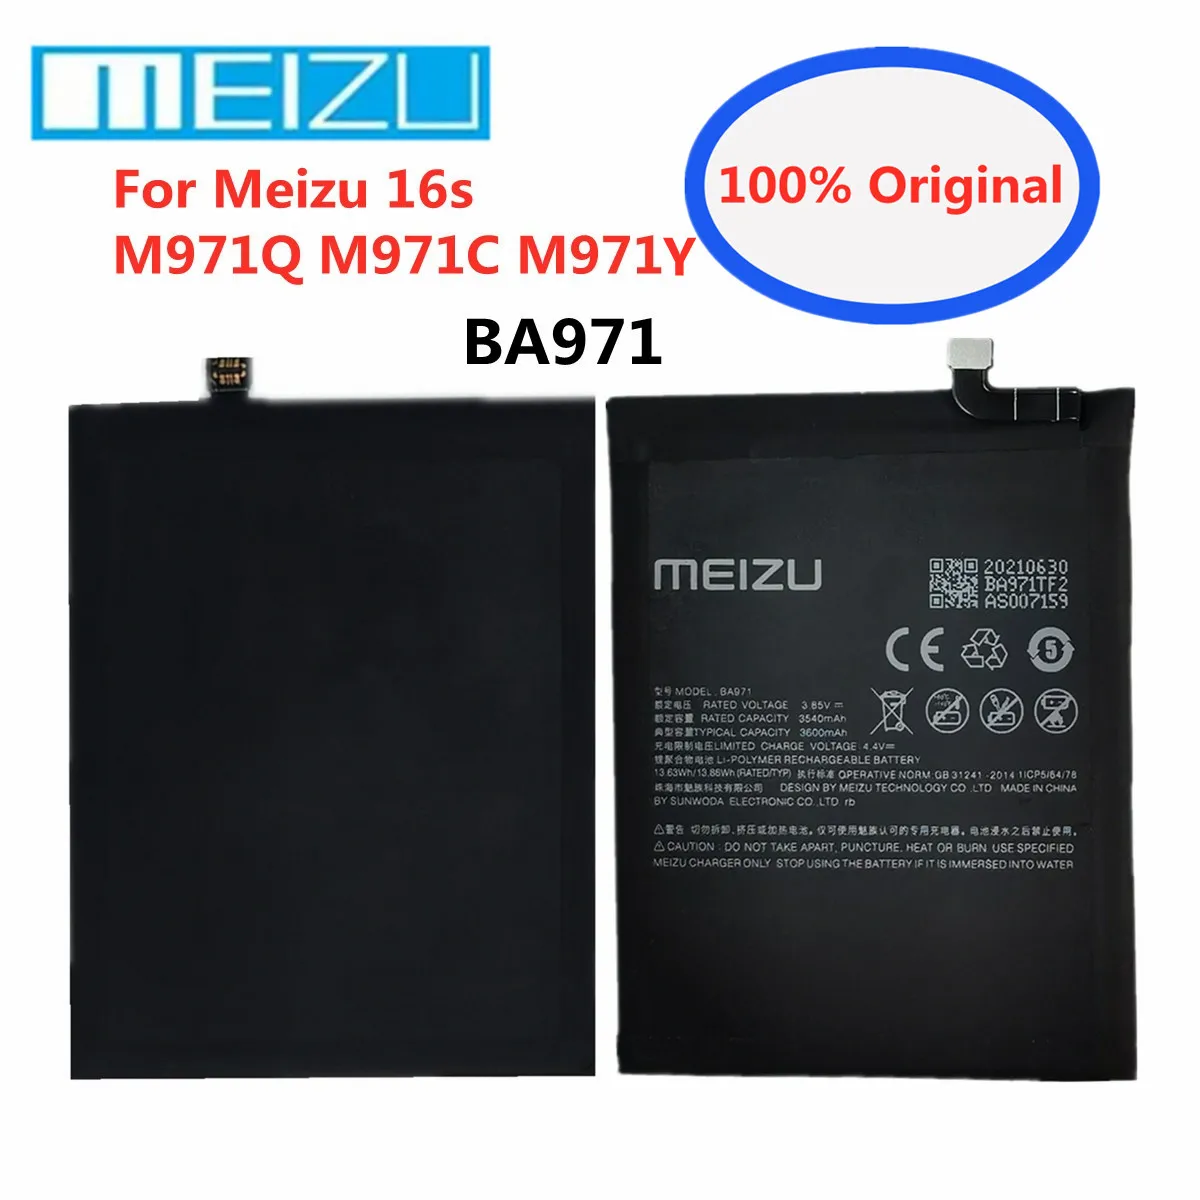 

New 100% Original 3600mAh BA971 For Meizu 16s M971Q M971C M971Y High Quality Replacement Smart Mobile Phone Battery Batteries